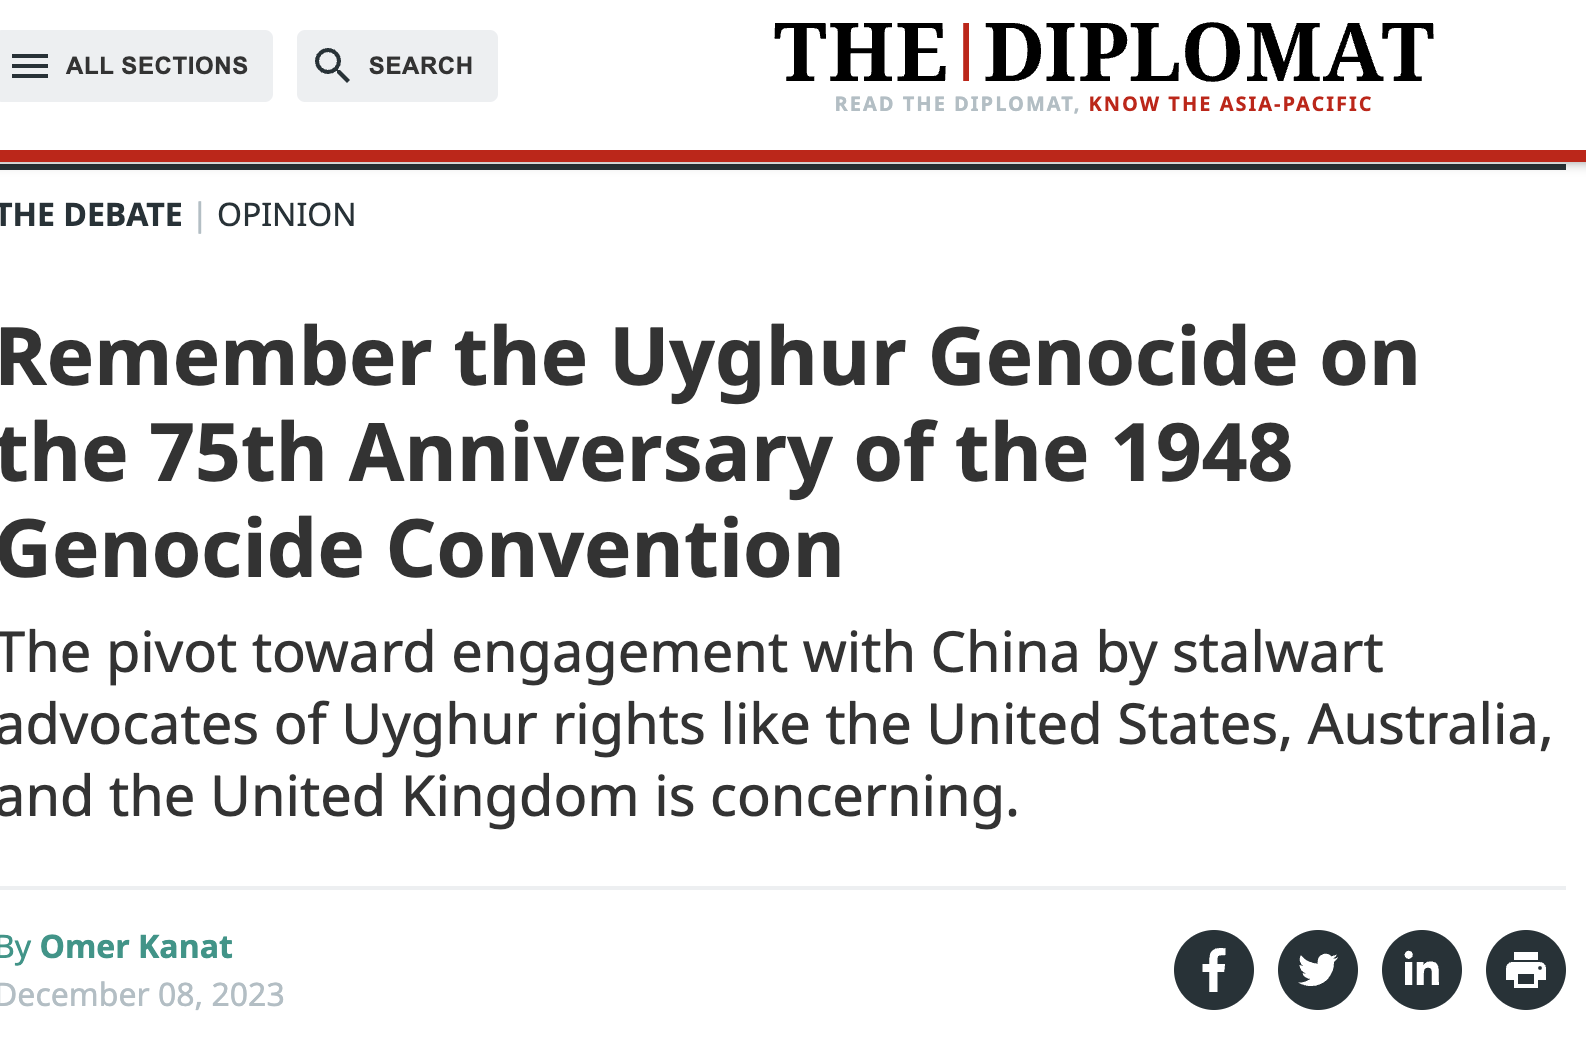 https://thediplomat.com/2023/12/remember-the-uyghur-genocide-on-the-75th-anniversary-of-the-1948-genocide-convention/